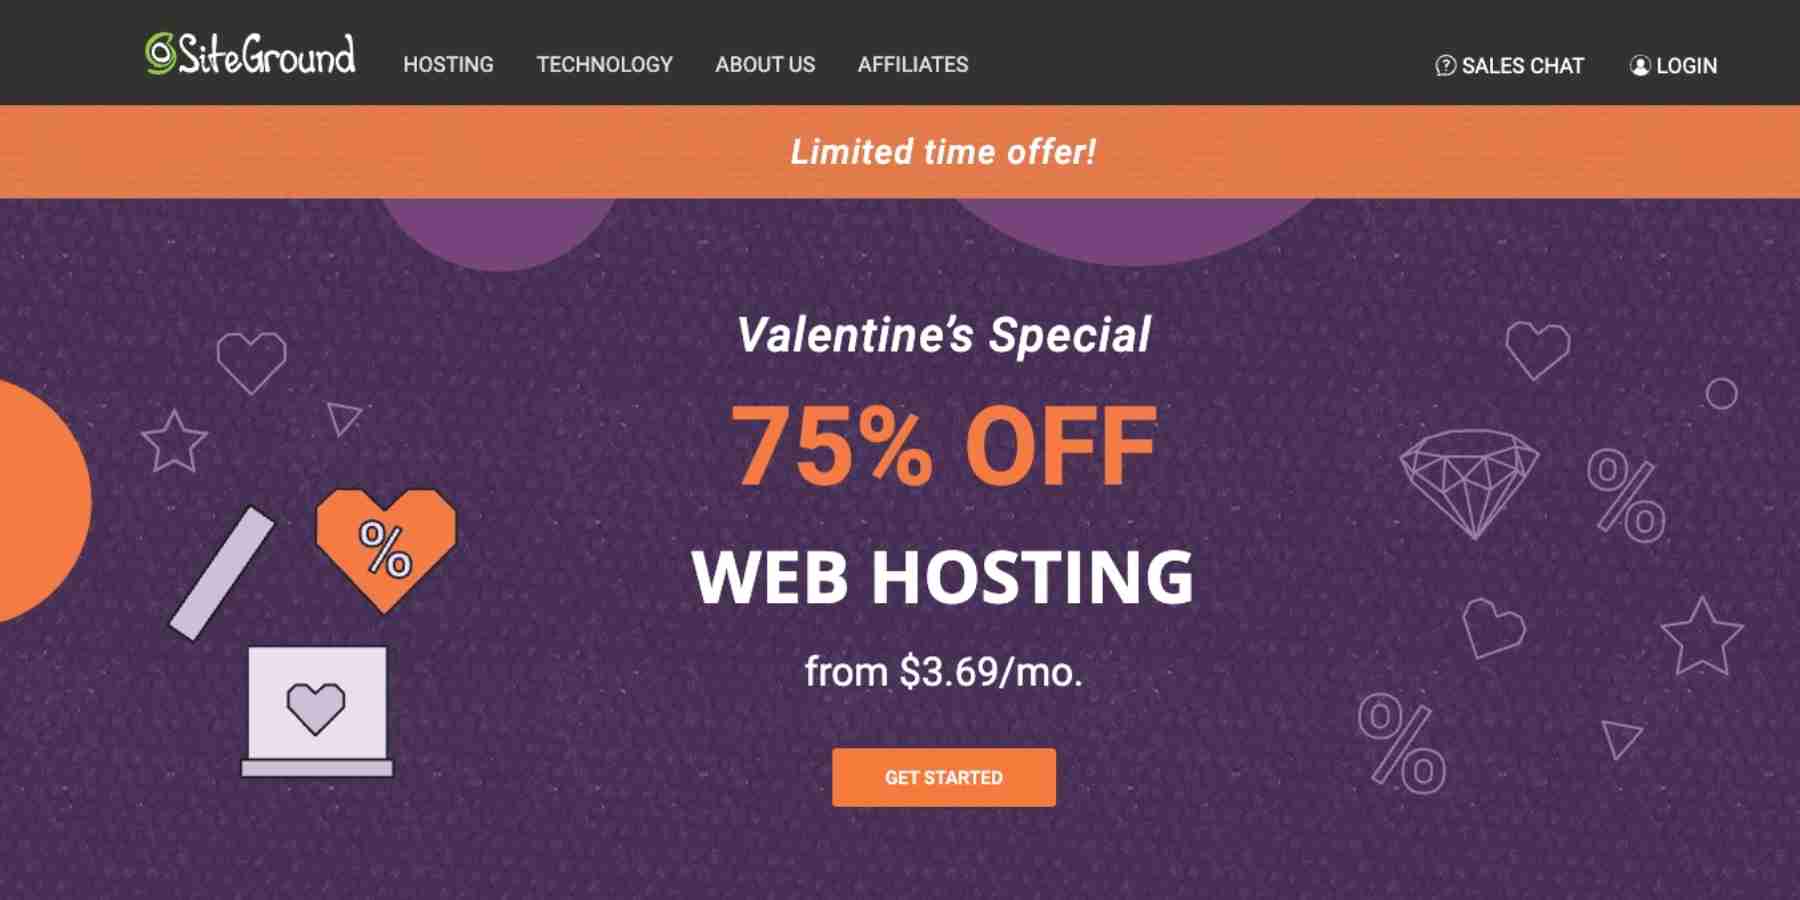 Cost of Hosting - SiteGround